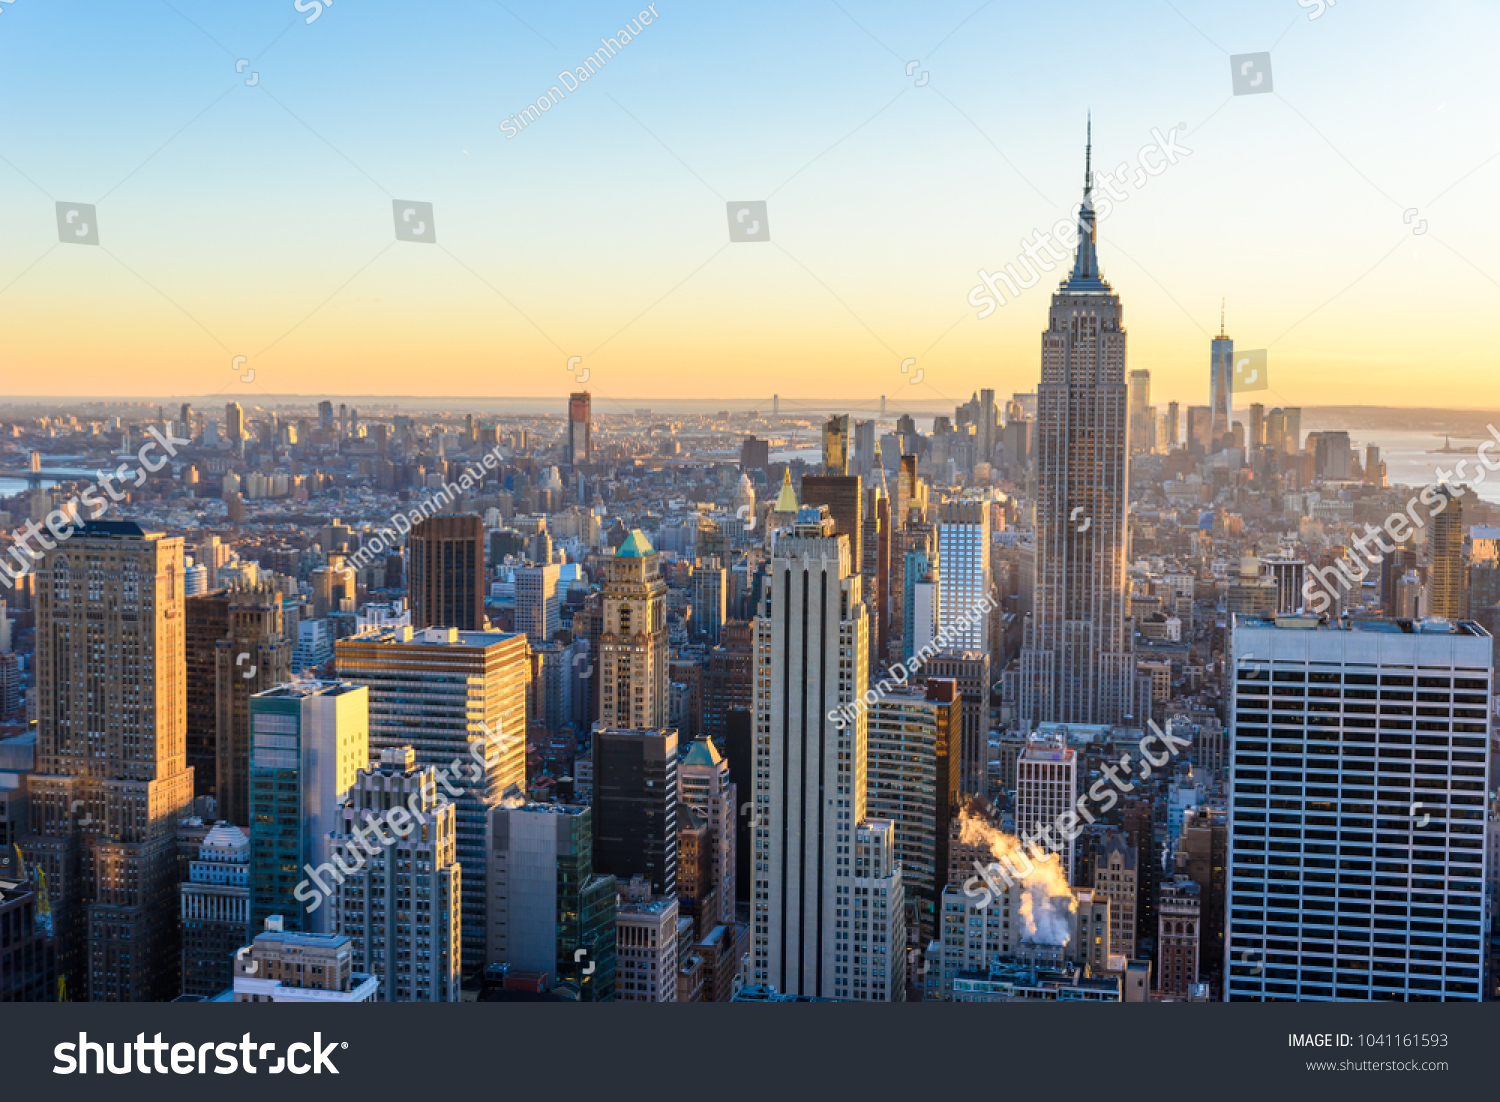 New York City - USA. View to Lower Manhattan downtown skyline with famous Empire State Building and skyscrapers at sunset. #1041161593